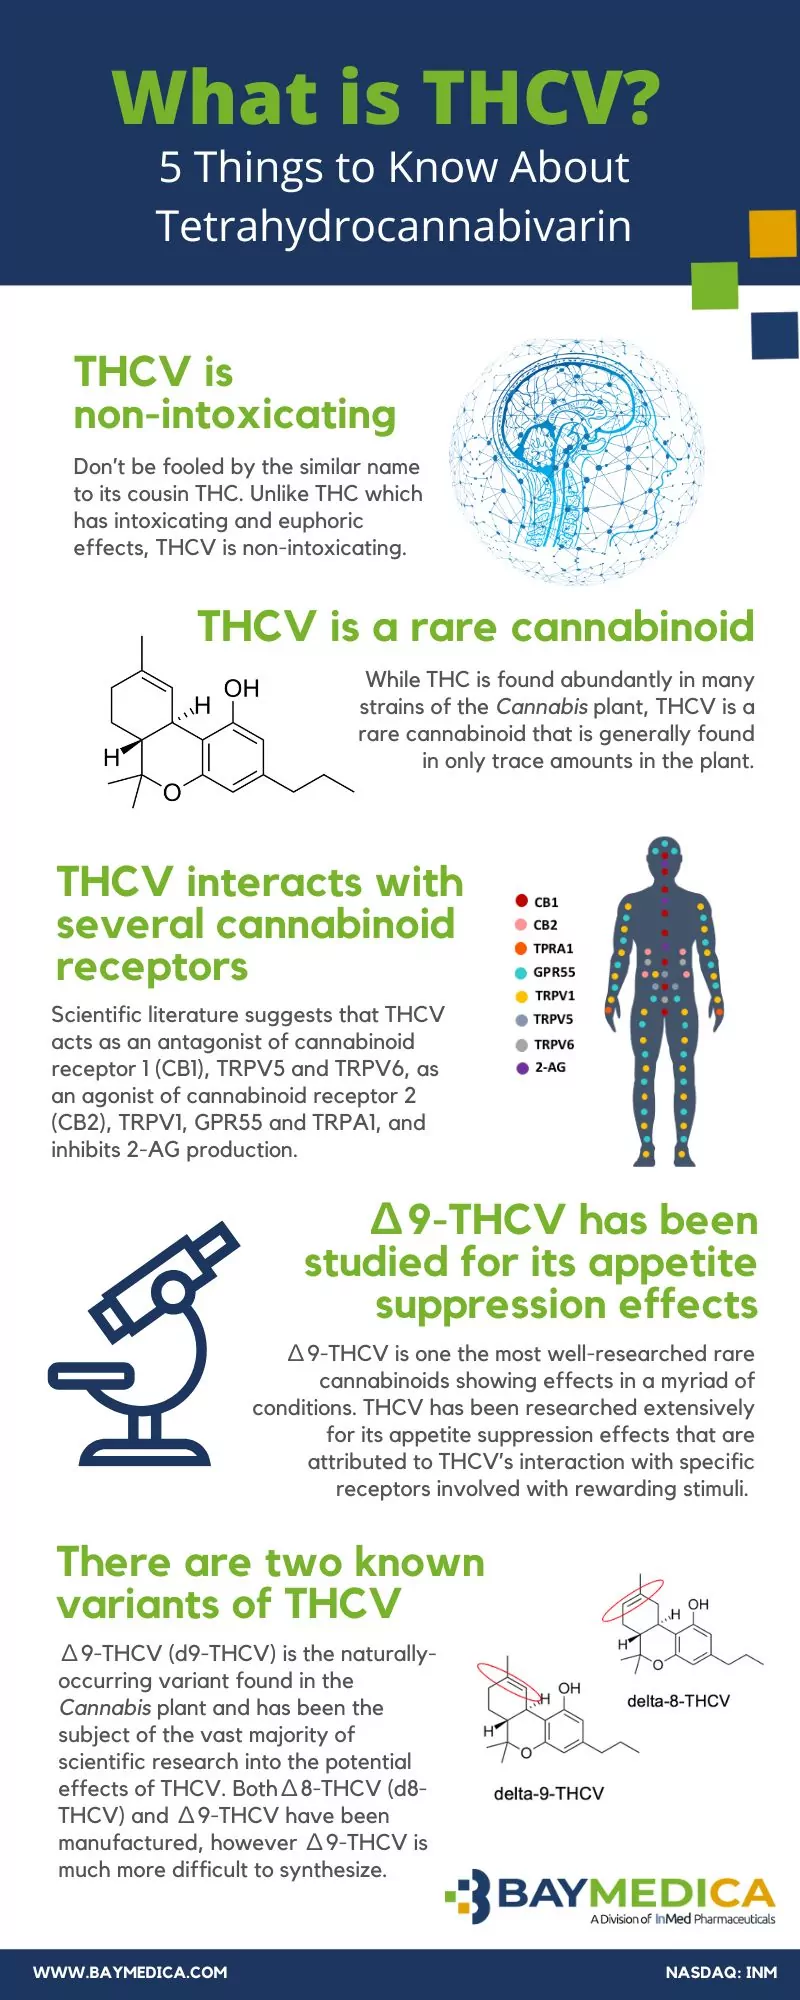 What is THCV? 5 Things to Know About THCV